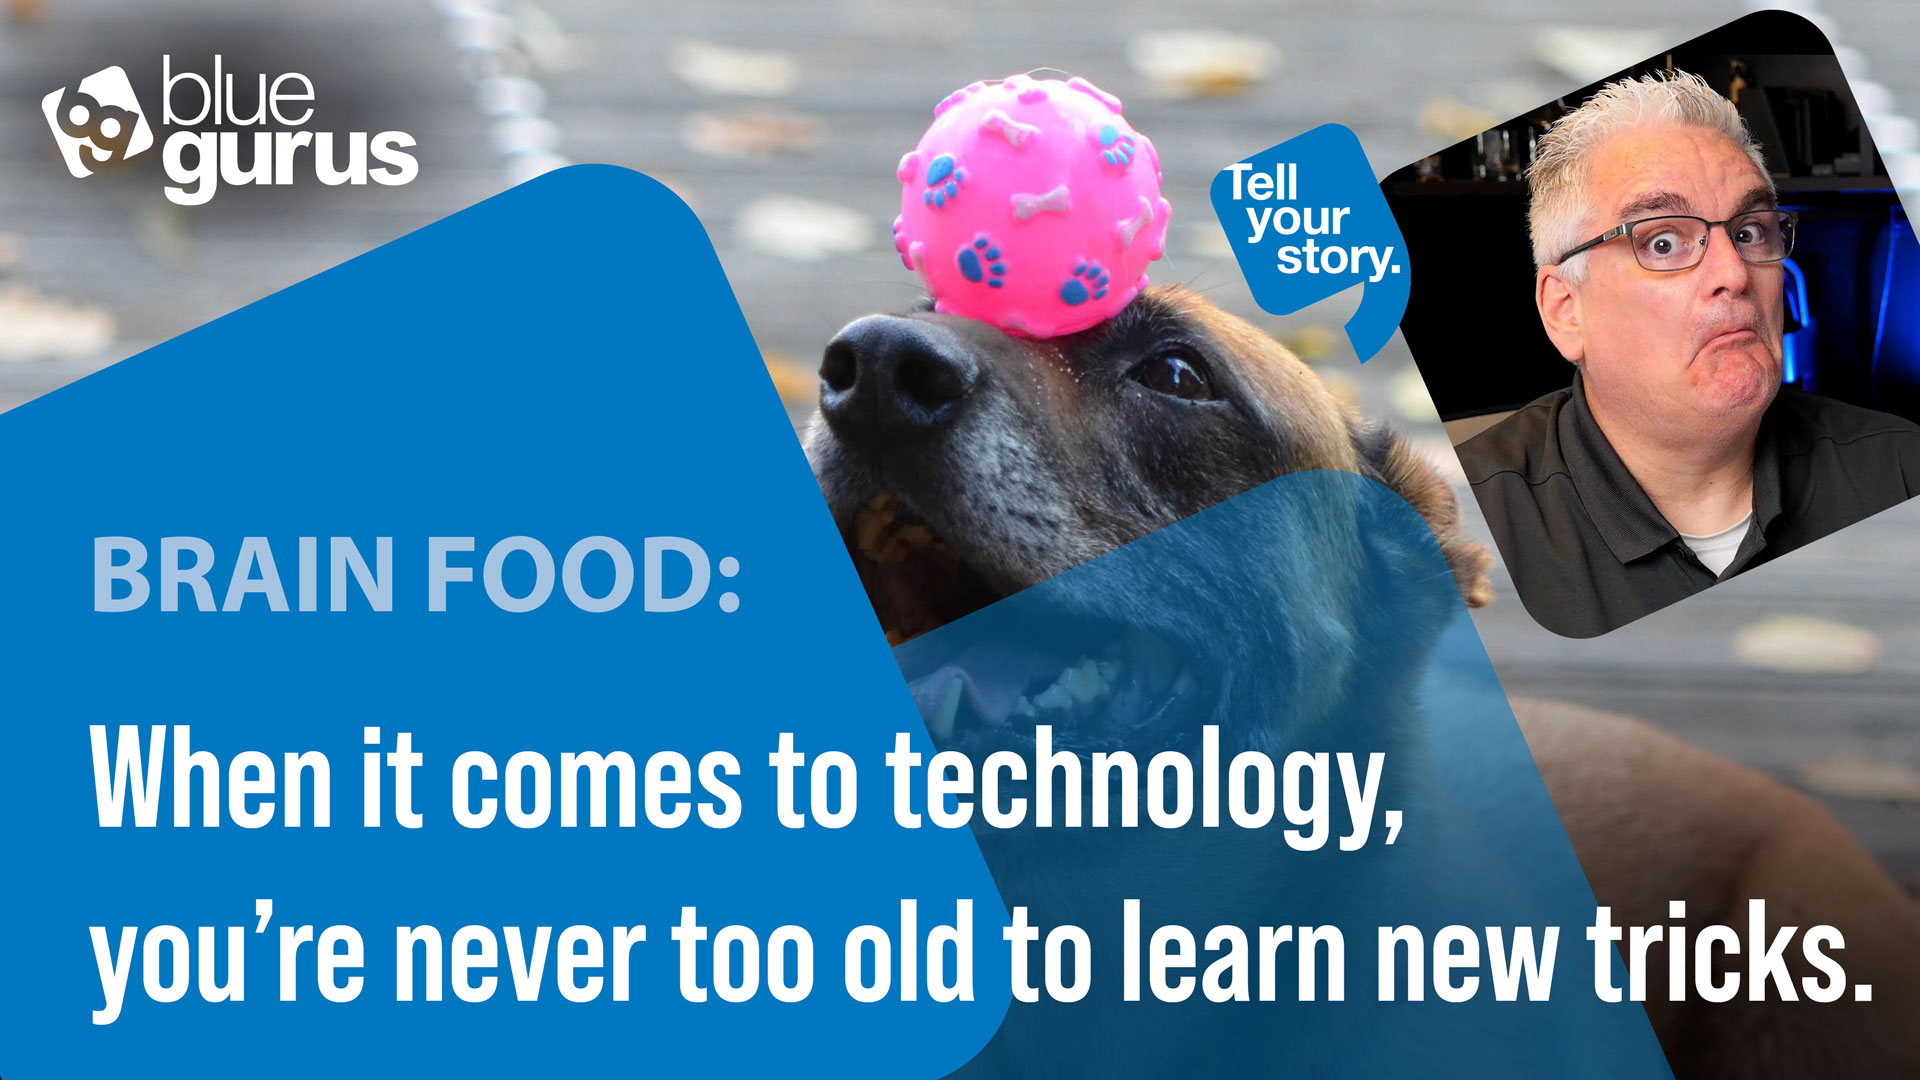 Brain Food: When it comes to technology, you’re never too old to learn new tricks.